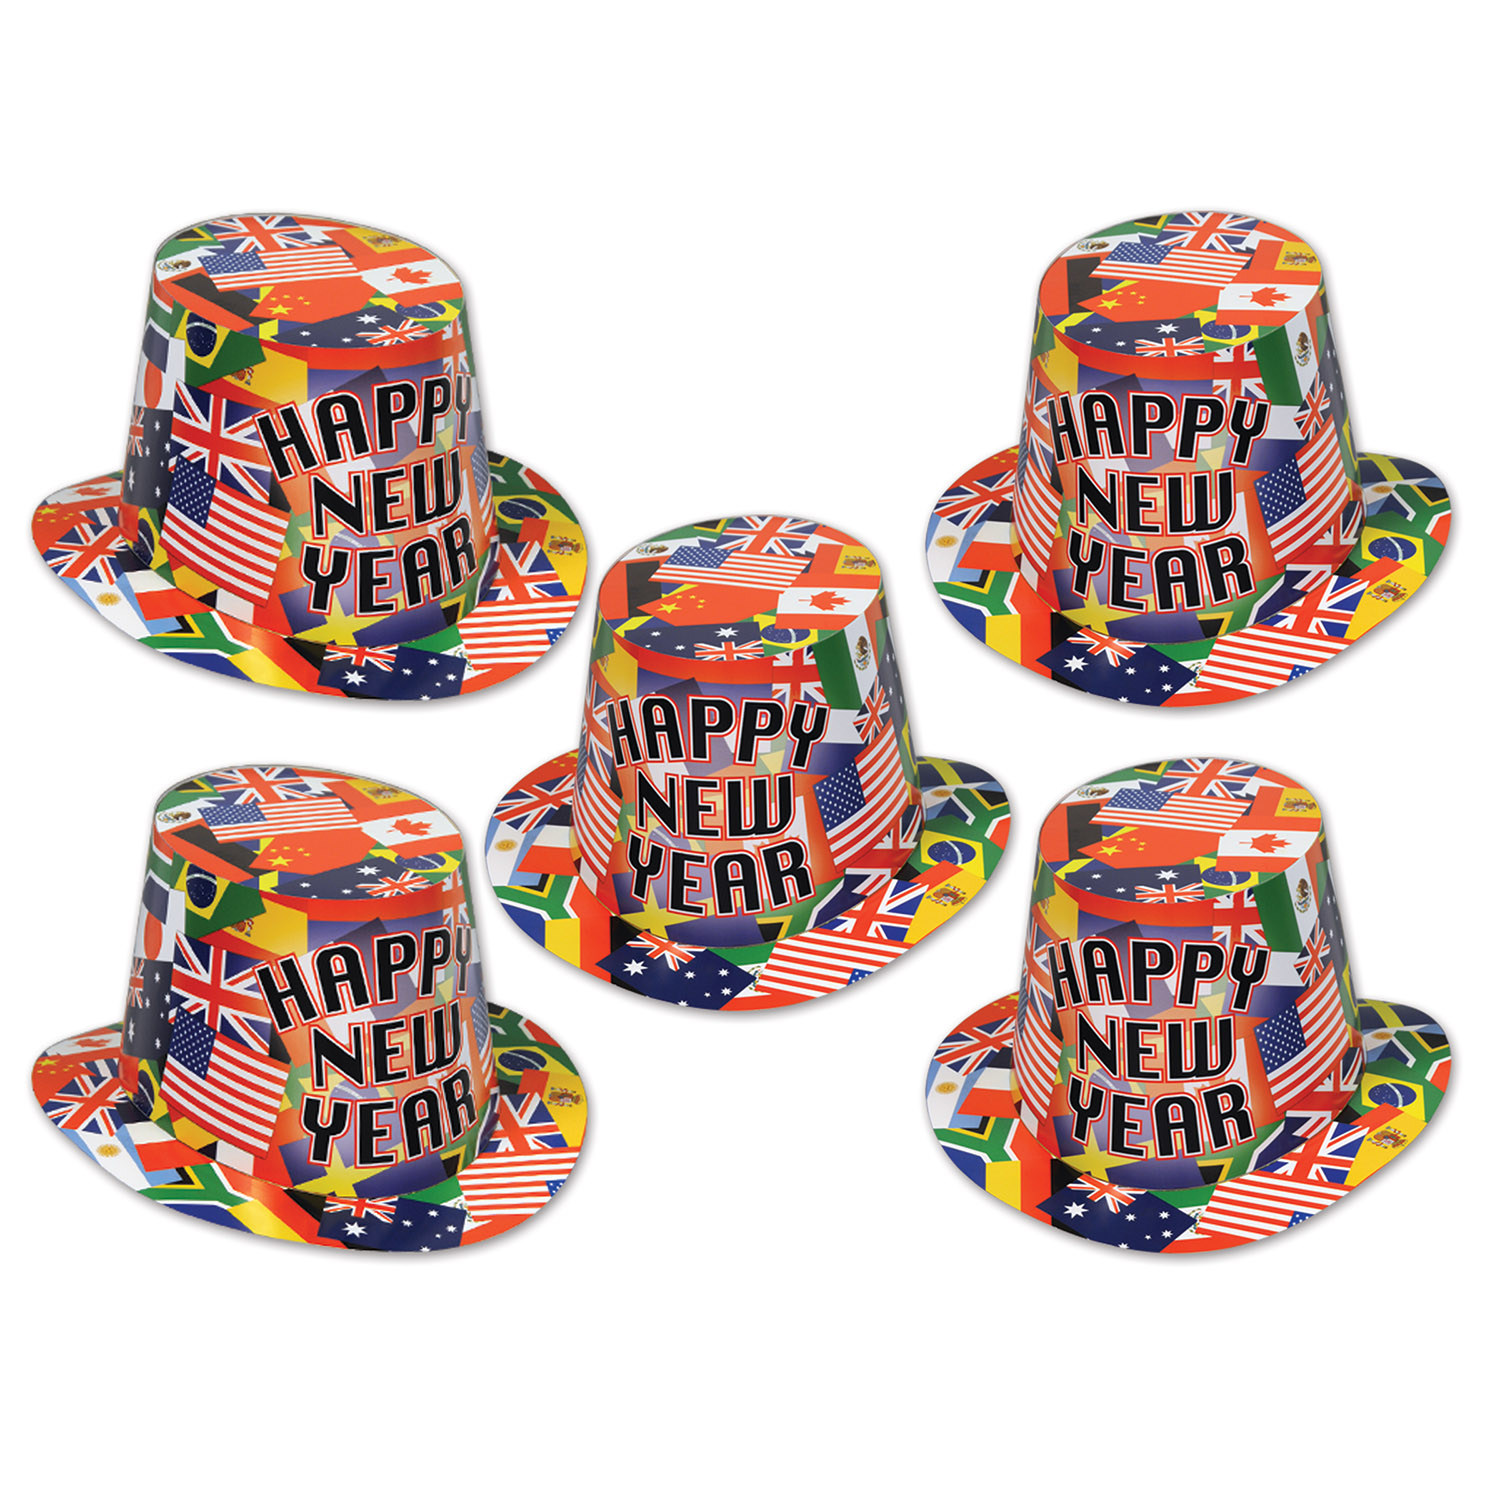 Hi-Hat printed with international flags and the words "Happy New Year".